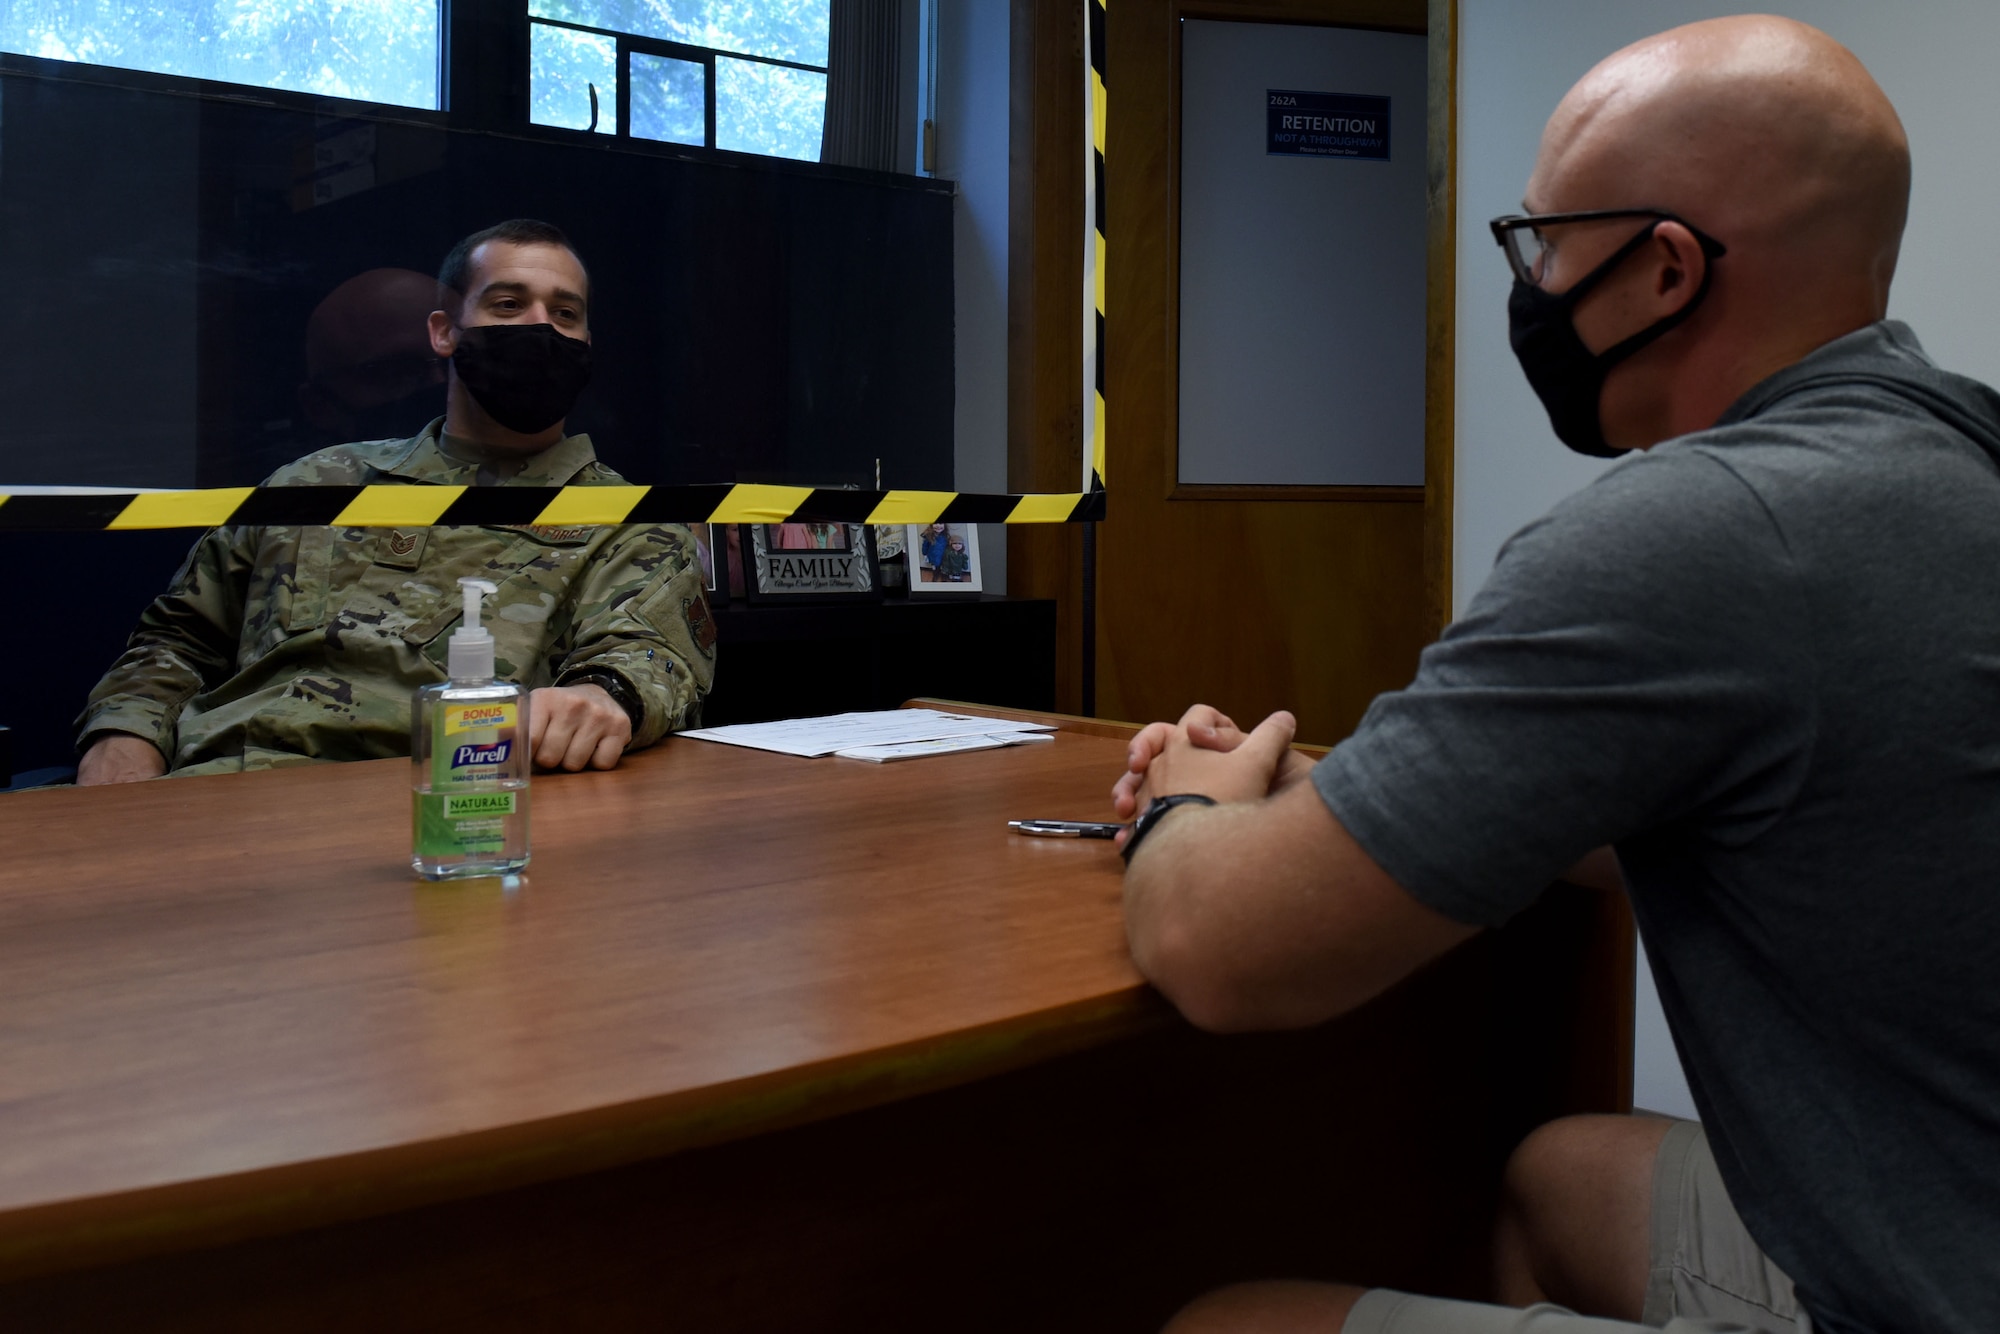 Tech. Sgt. Alex Wagner, a Production Recruiter, speaks with an incoming Airman at the 171st Air Refueling Wing in Coraopolis, Pa. Aug. 17, 2020. In response to COVID-19, the 171st implemented stringent safety and health protocols. (U.S. Air National Guard Photo by Staff Sgt. Kyle Brooks)